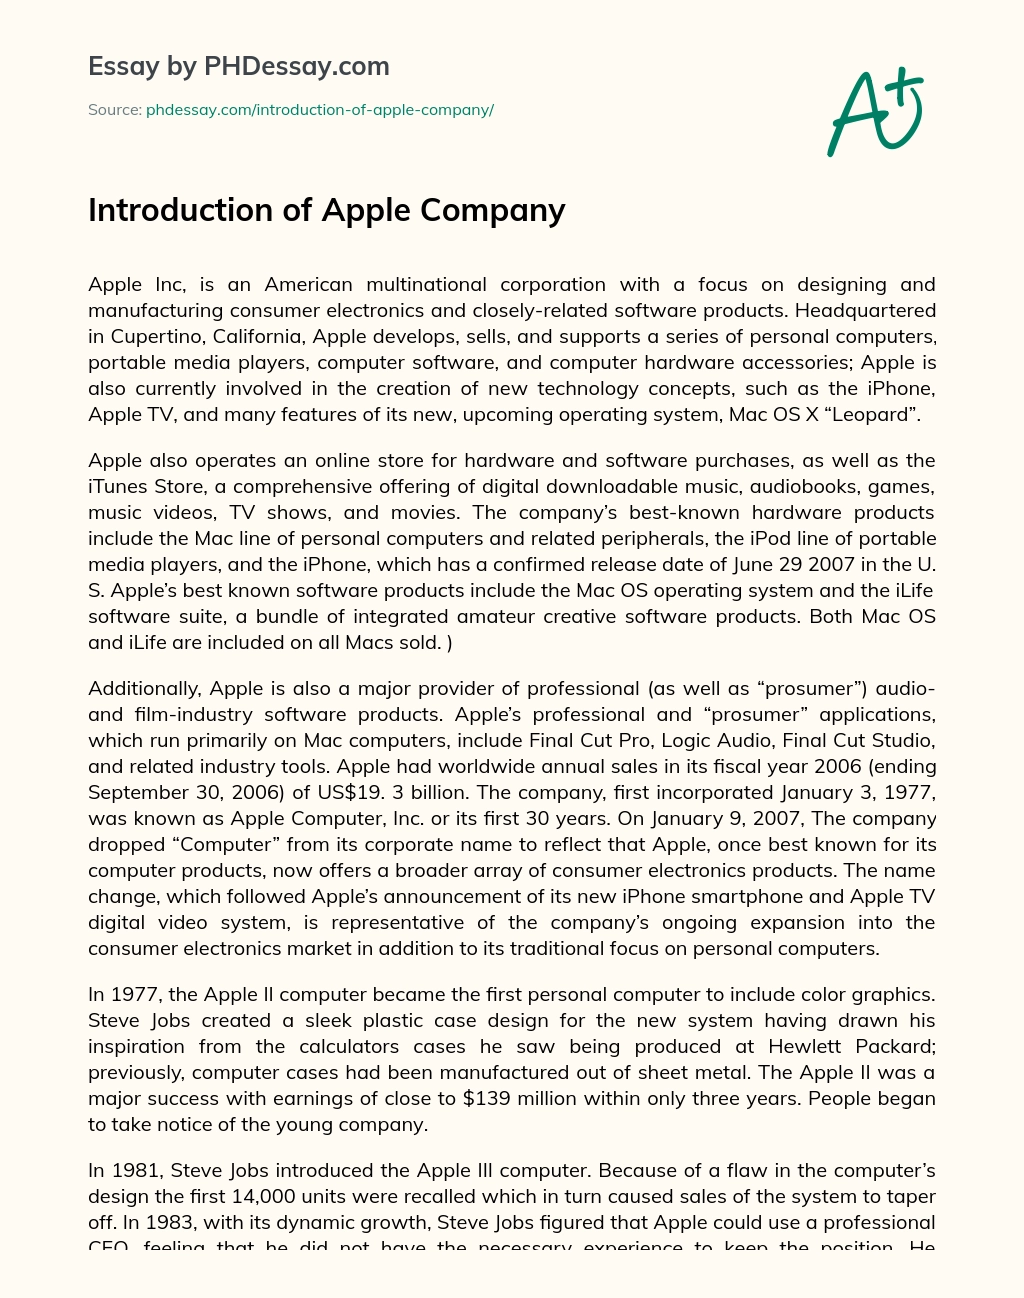 Introduction of Apple Company essay